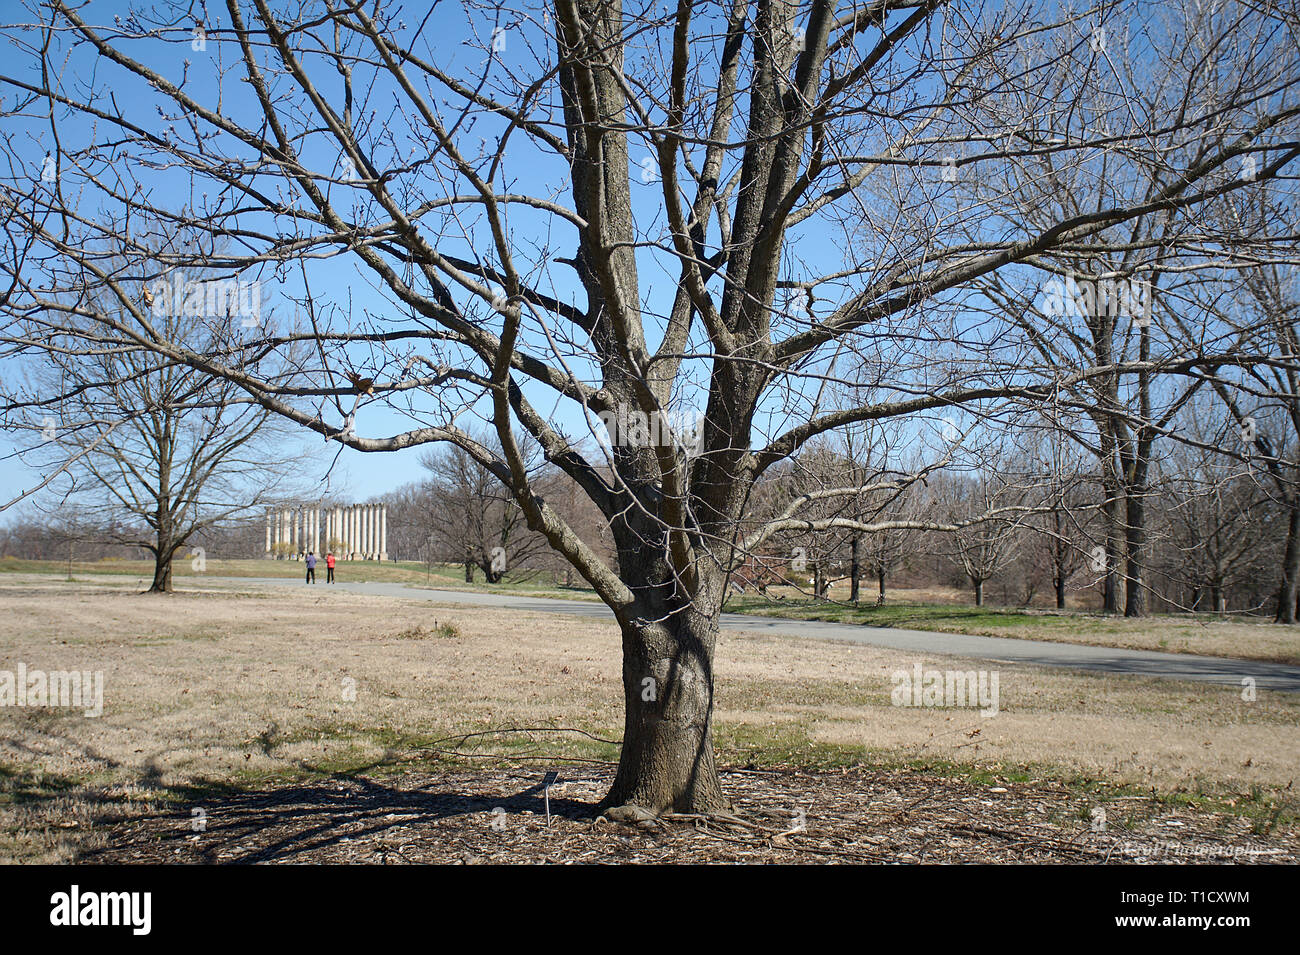 Scarlet Oak Tree early spring without leaves Stock Photo